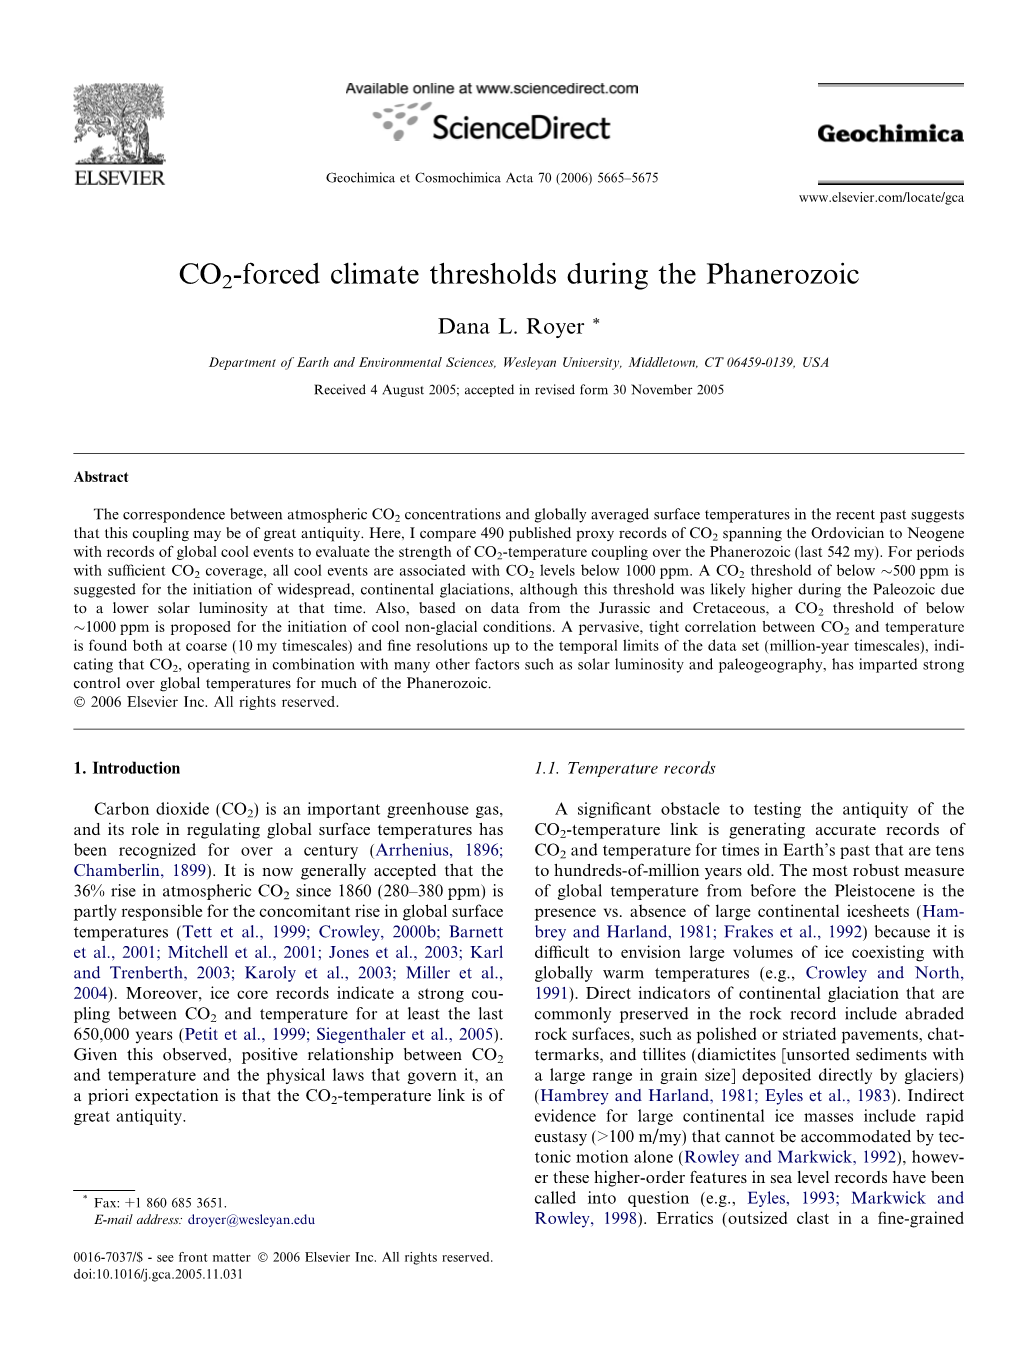 CO2-Forced Climate Thresholds During the Phanerozoic